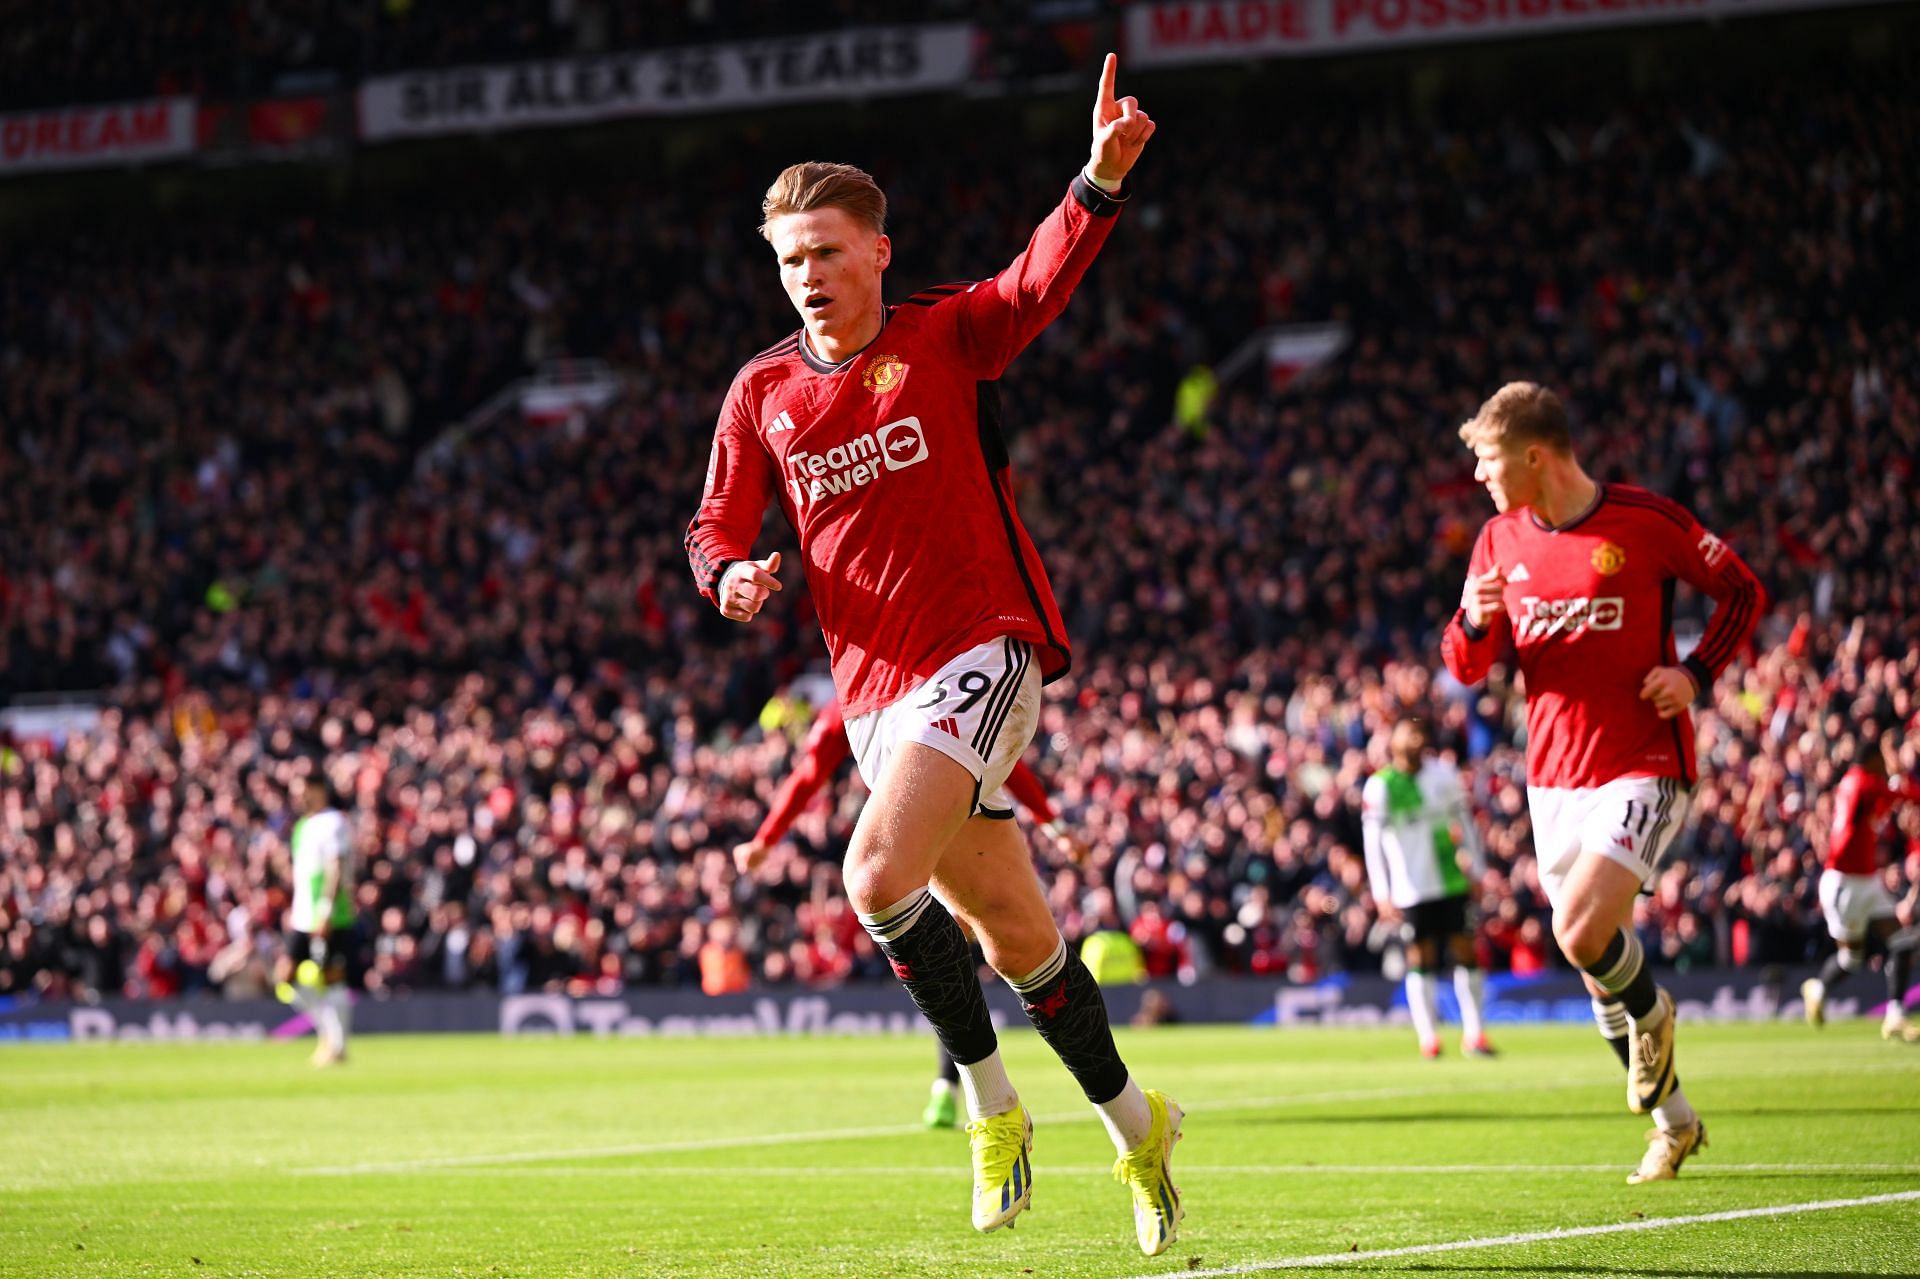 Scott McTominay is likely to continue his stay at Old Trafford